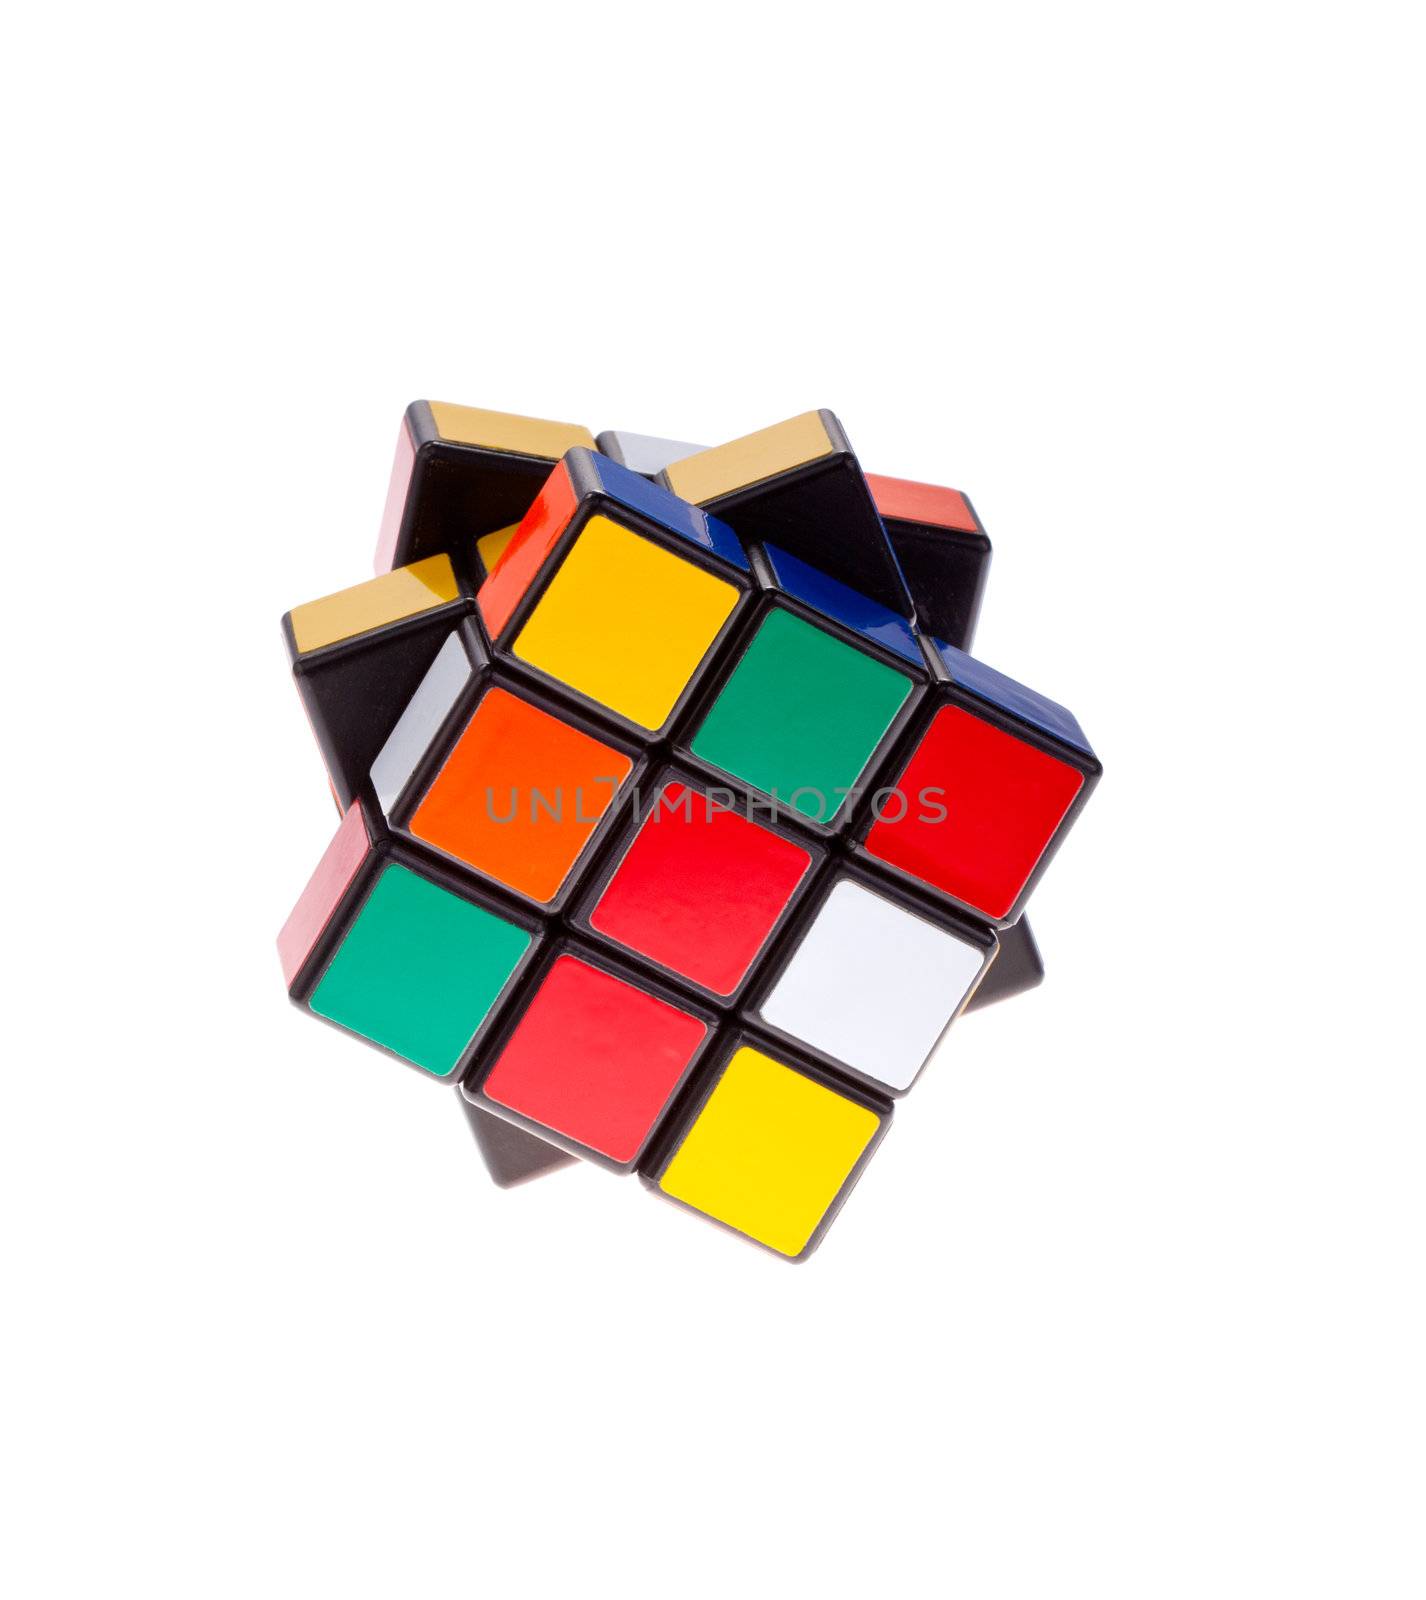 Rubik's Cube isolated on a white background